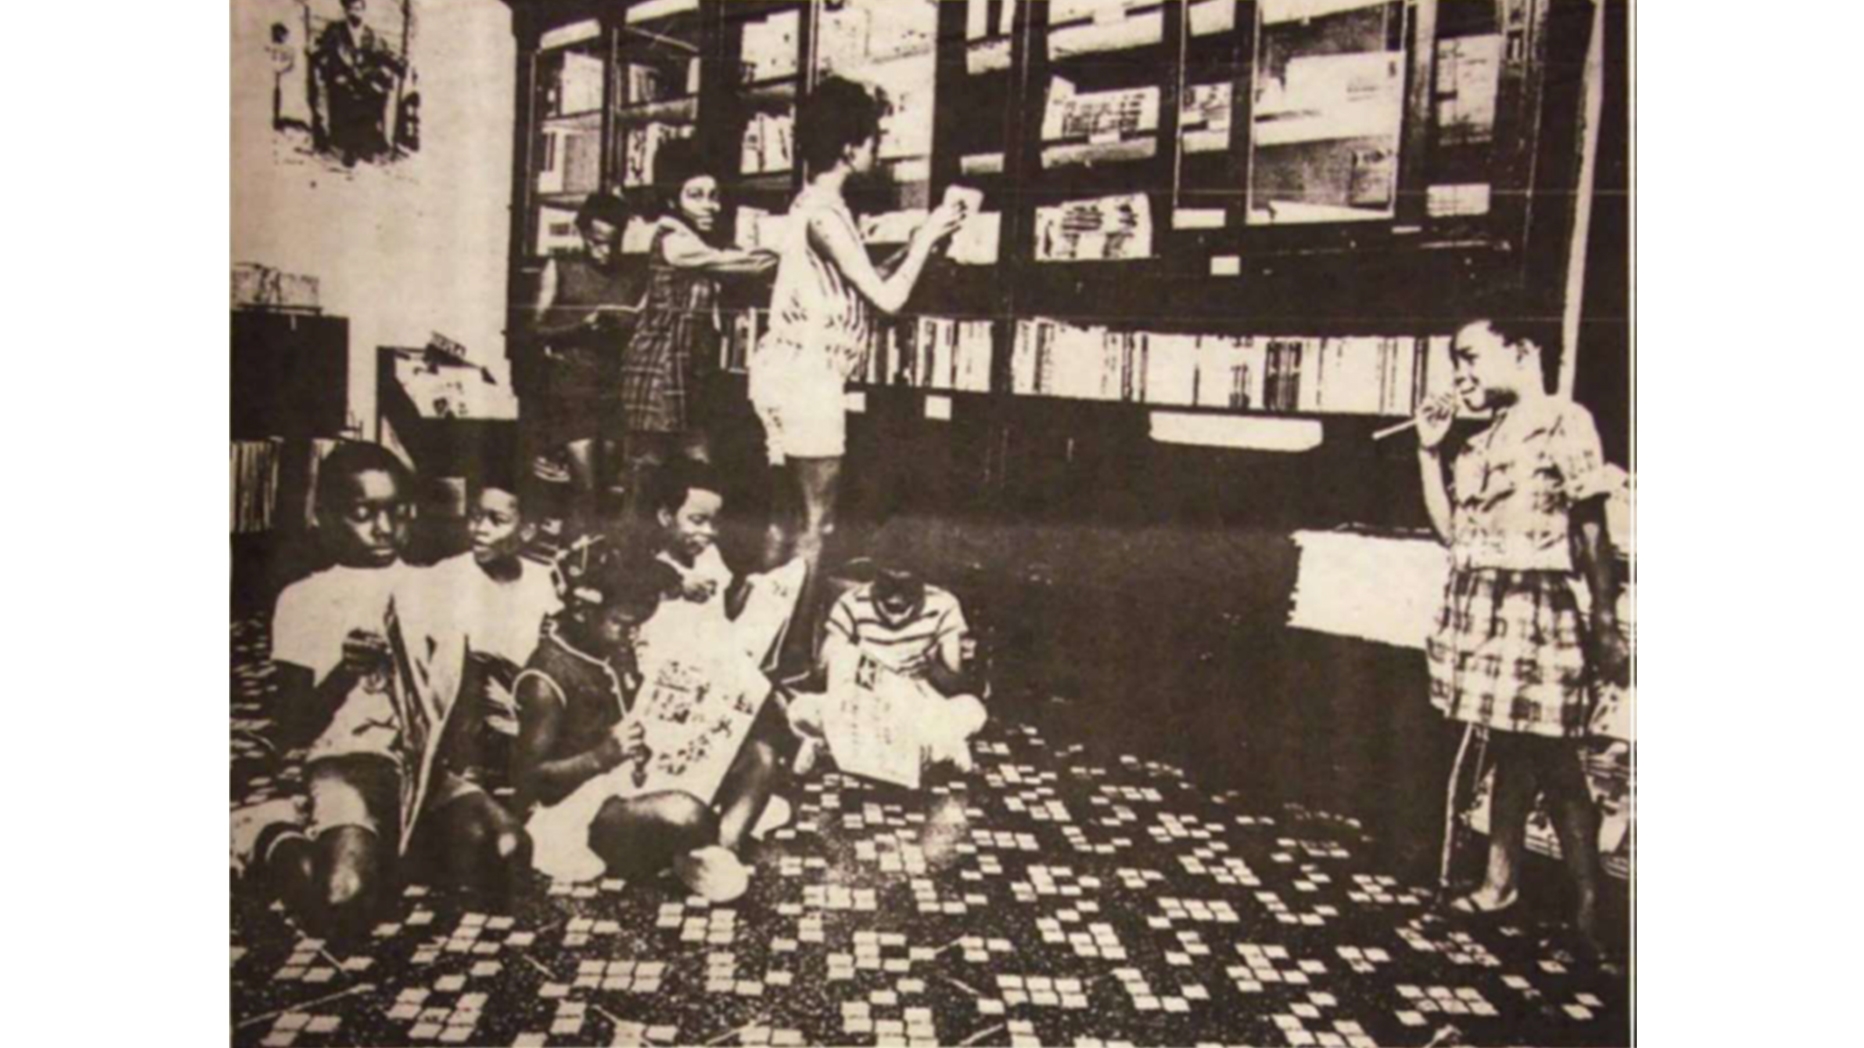 A reading room inside a People’s Free Library in Philadelphia, Pennsylvania in the early 1970s   Source: Unknown. A People's Free Library for All the People. Photograph. The Black Panther Intercommunal News Service Vol. VII, No13. San Francisco, CA: Black Panther Party for Self Defense, 1971. 